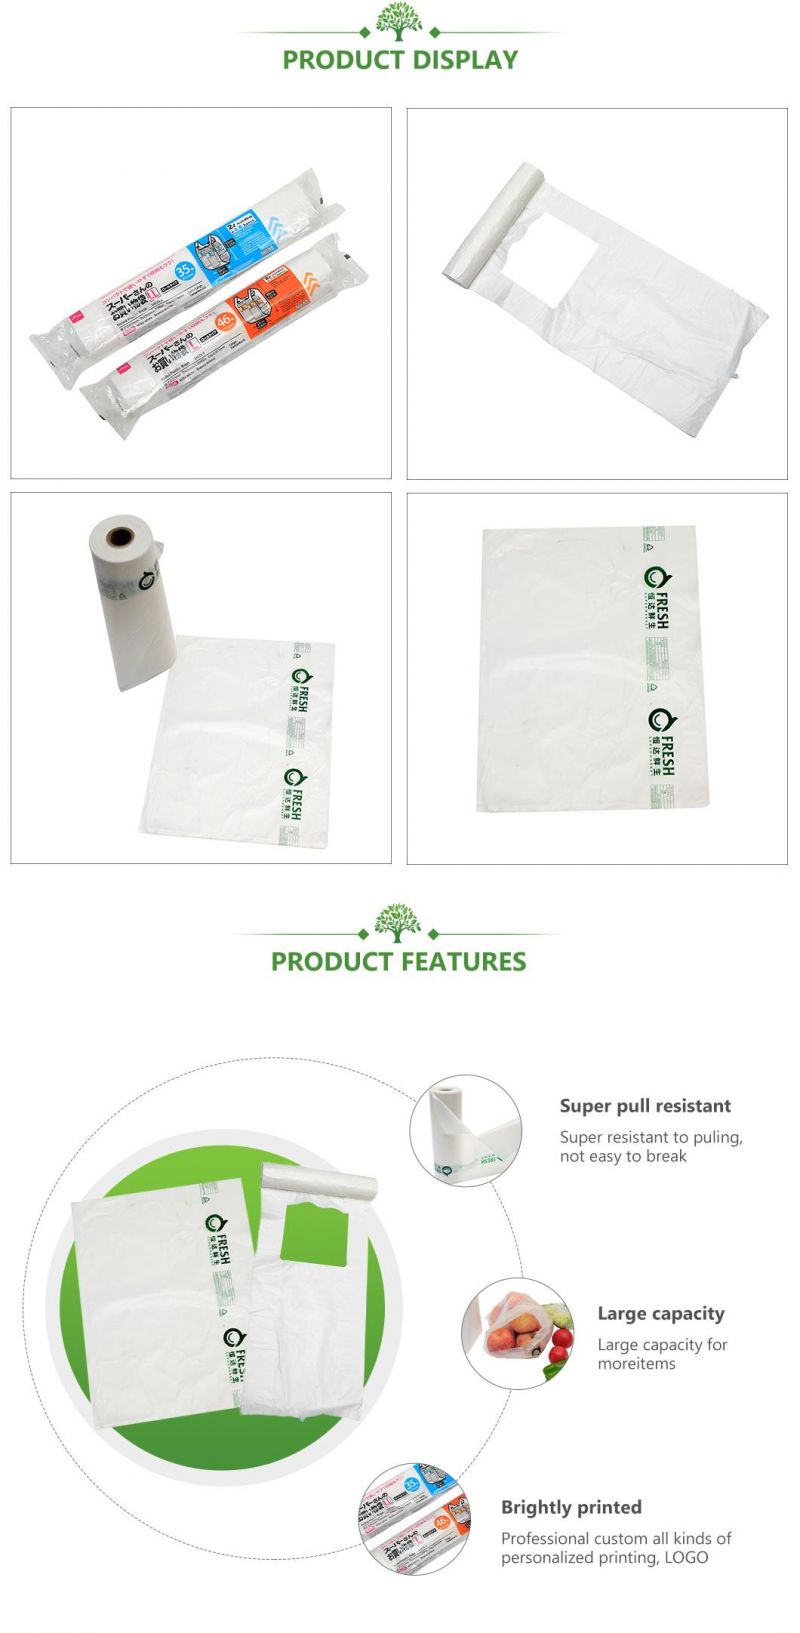 China Biodegradable Bags Compostable Roller Bags Manufacturer with Ok Compost Home, Ok Compost Industrial, Seeding Certificate